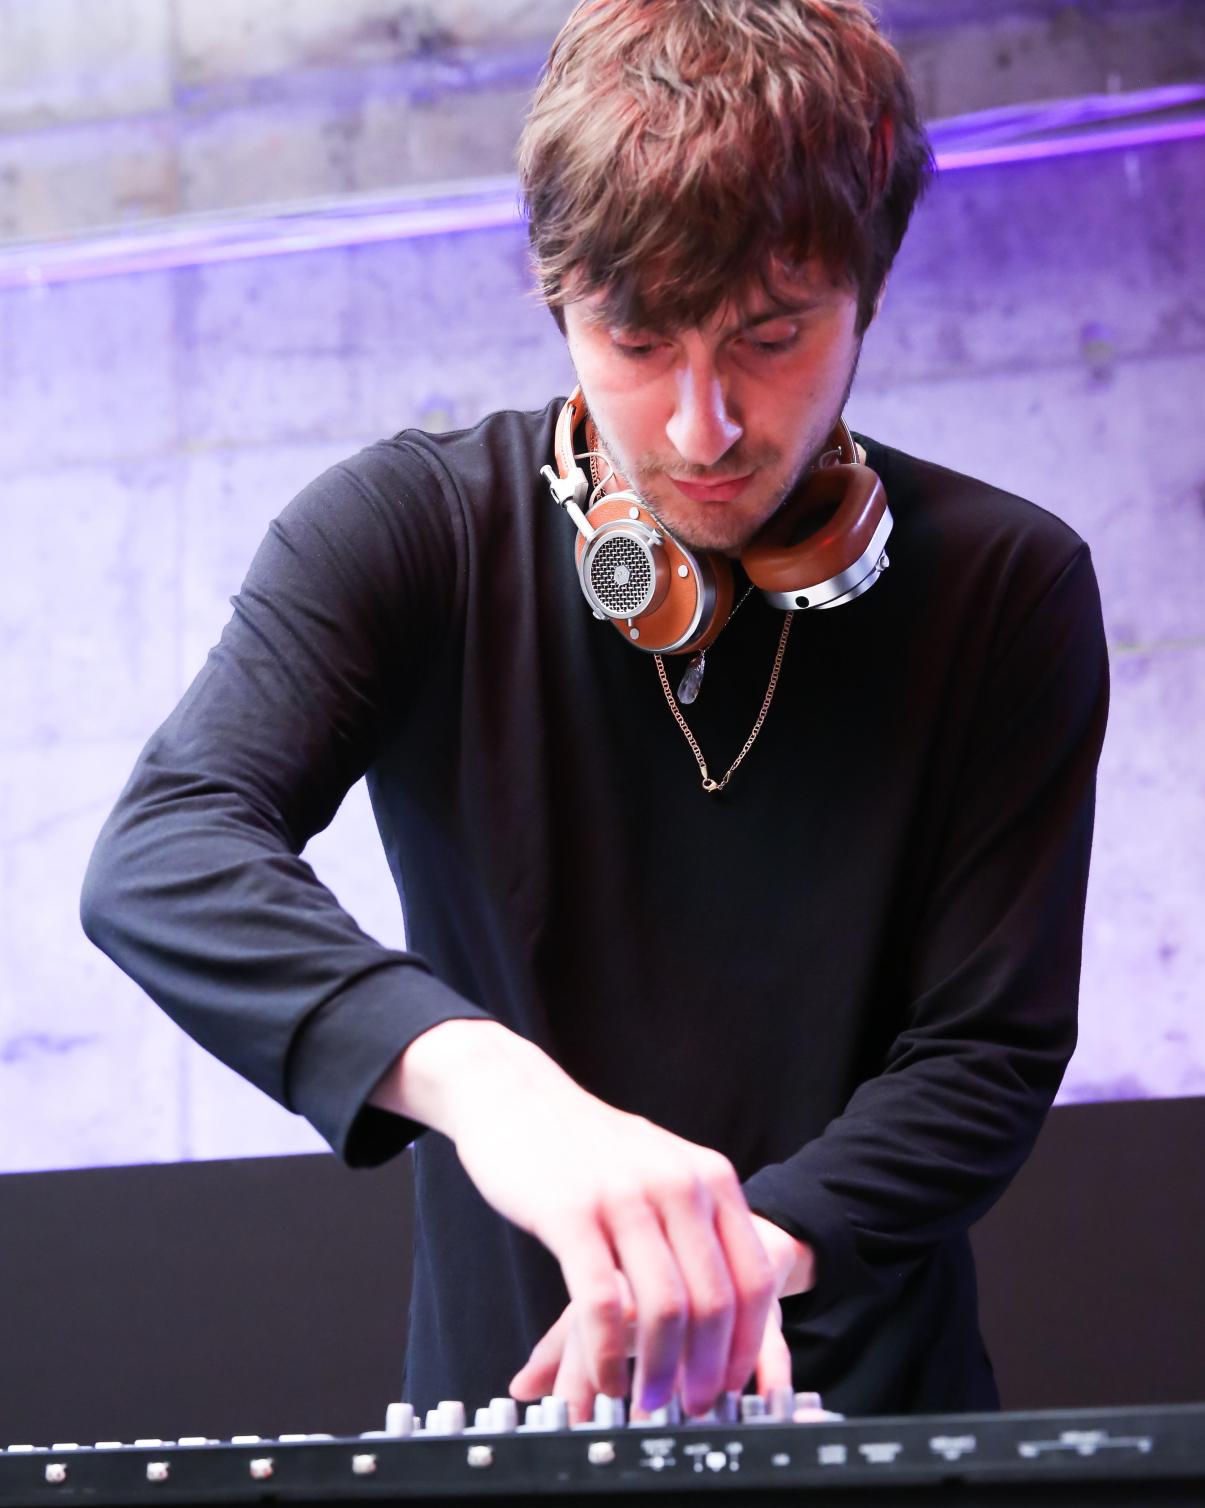 Photograph of a DJ at The Master & Dynamic Launch Event